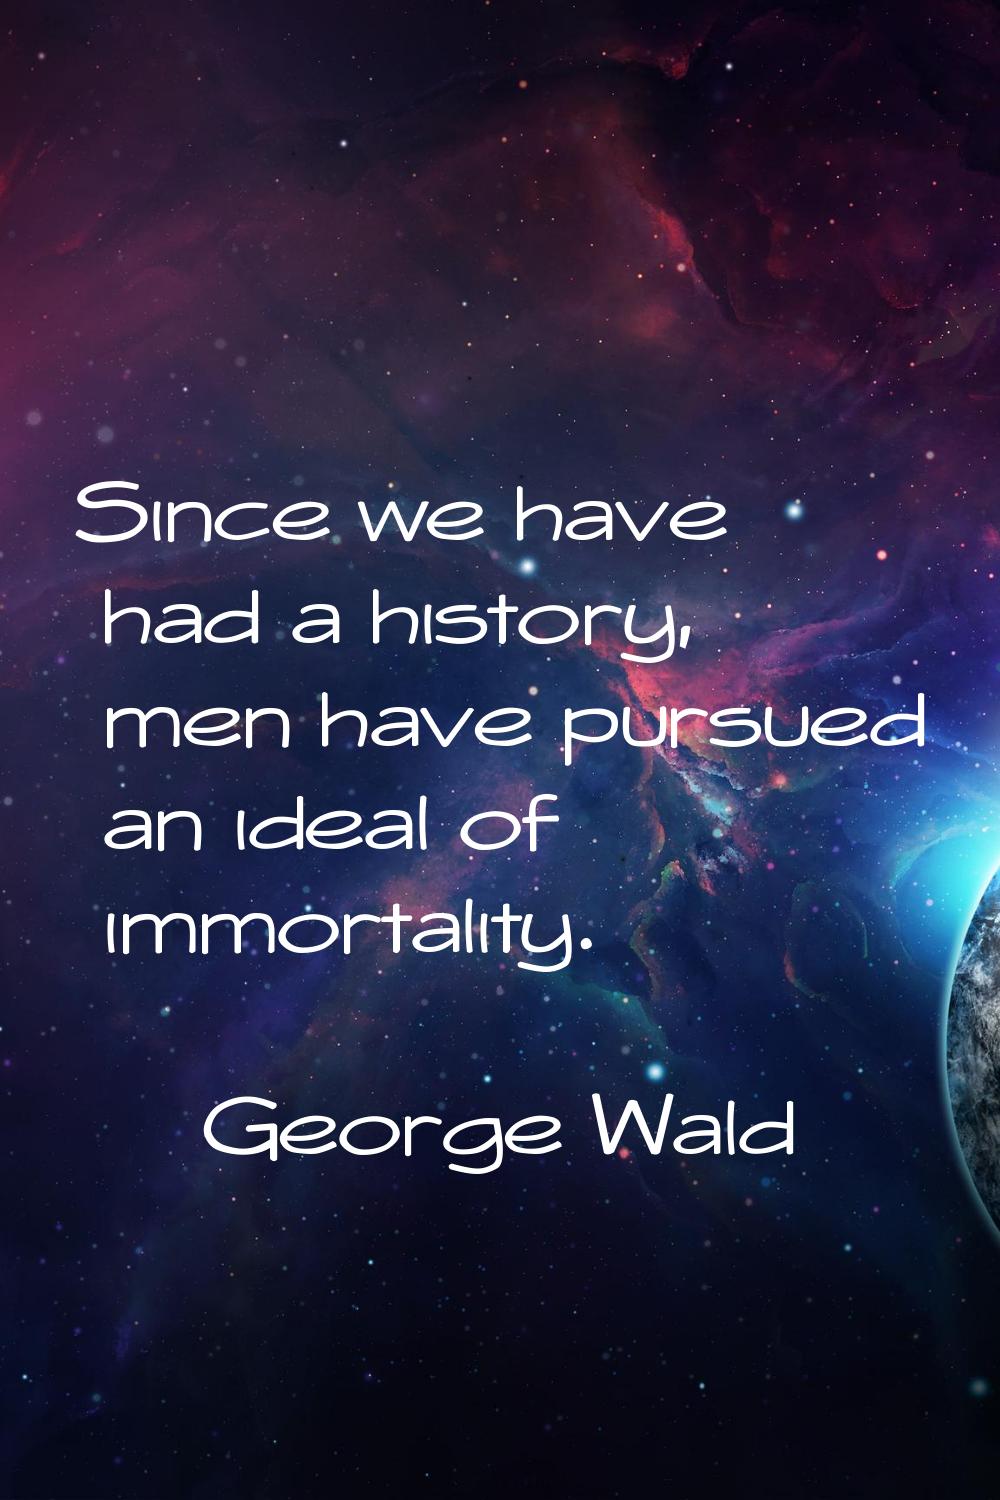 Since we have had a history, men have pursued an ideal of immortality.